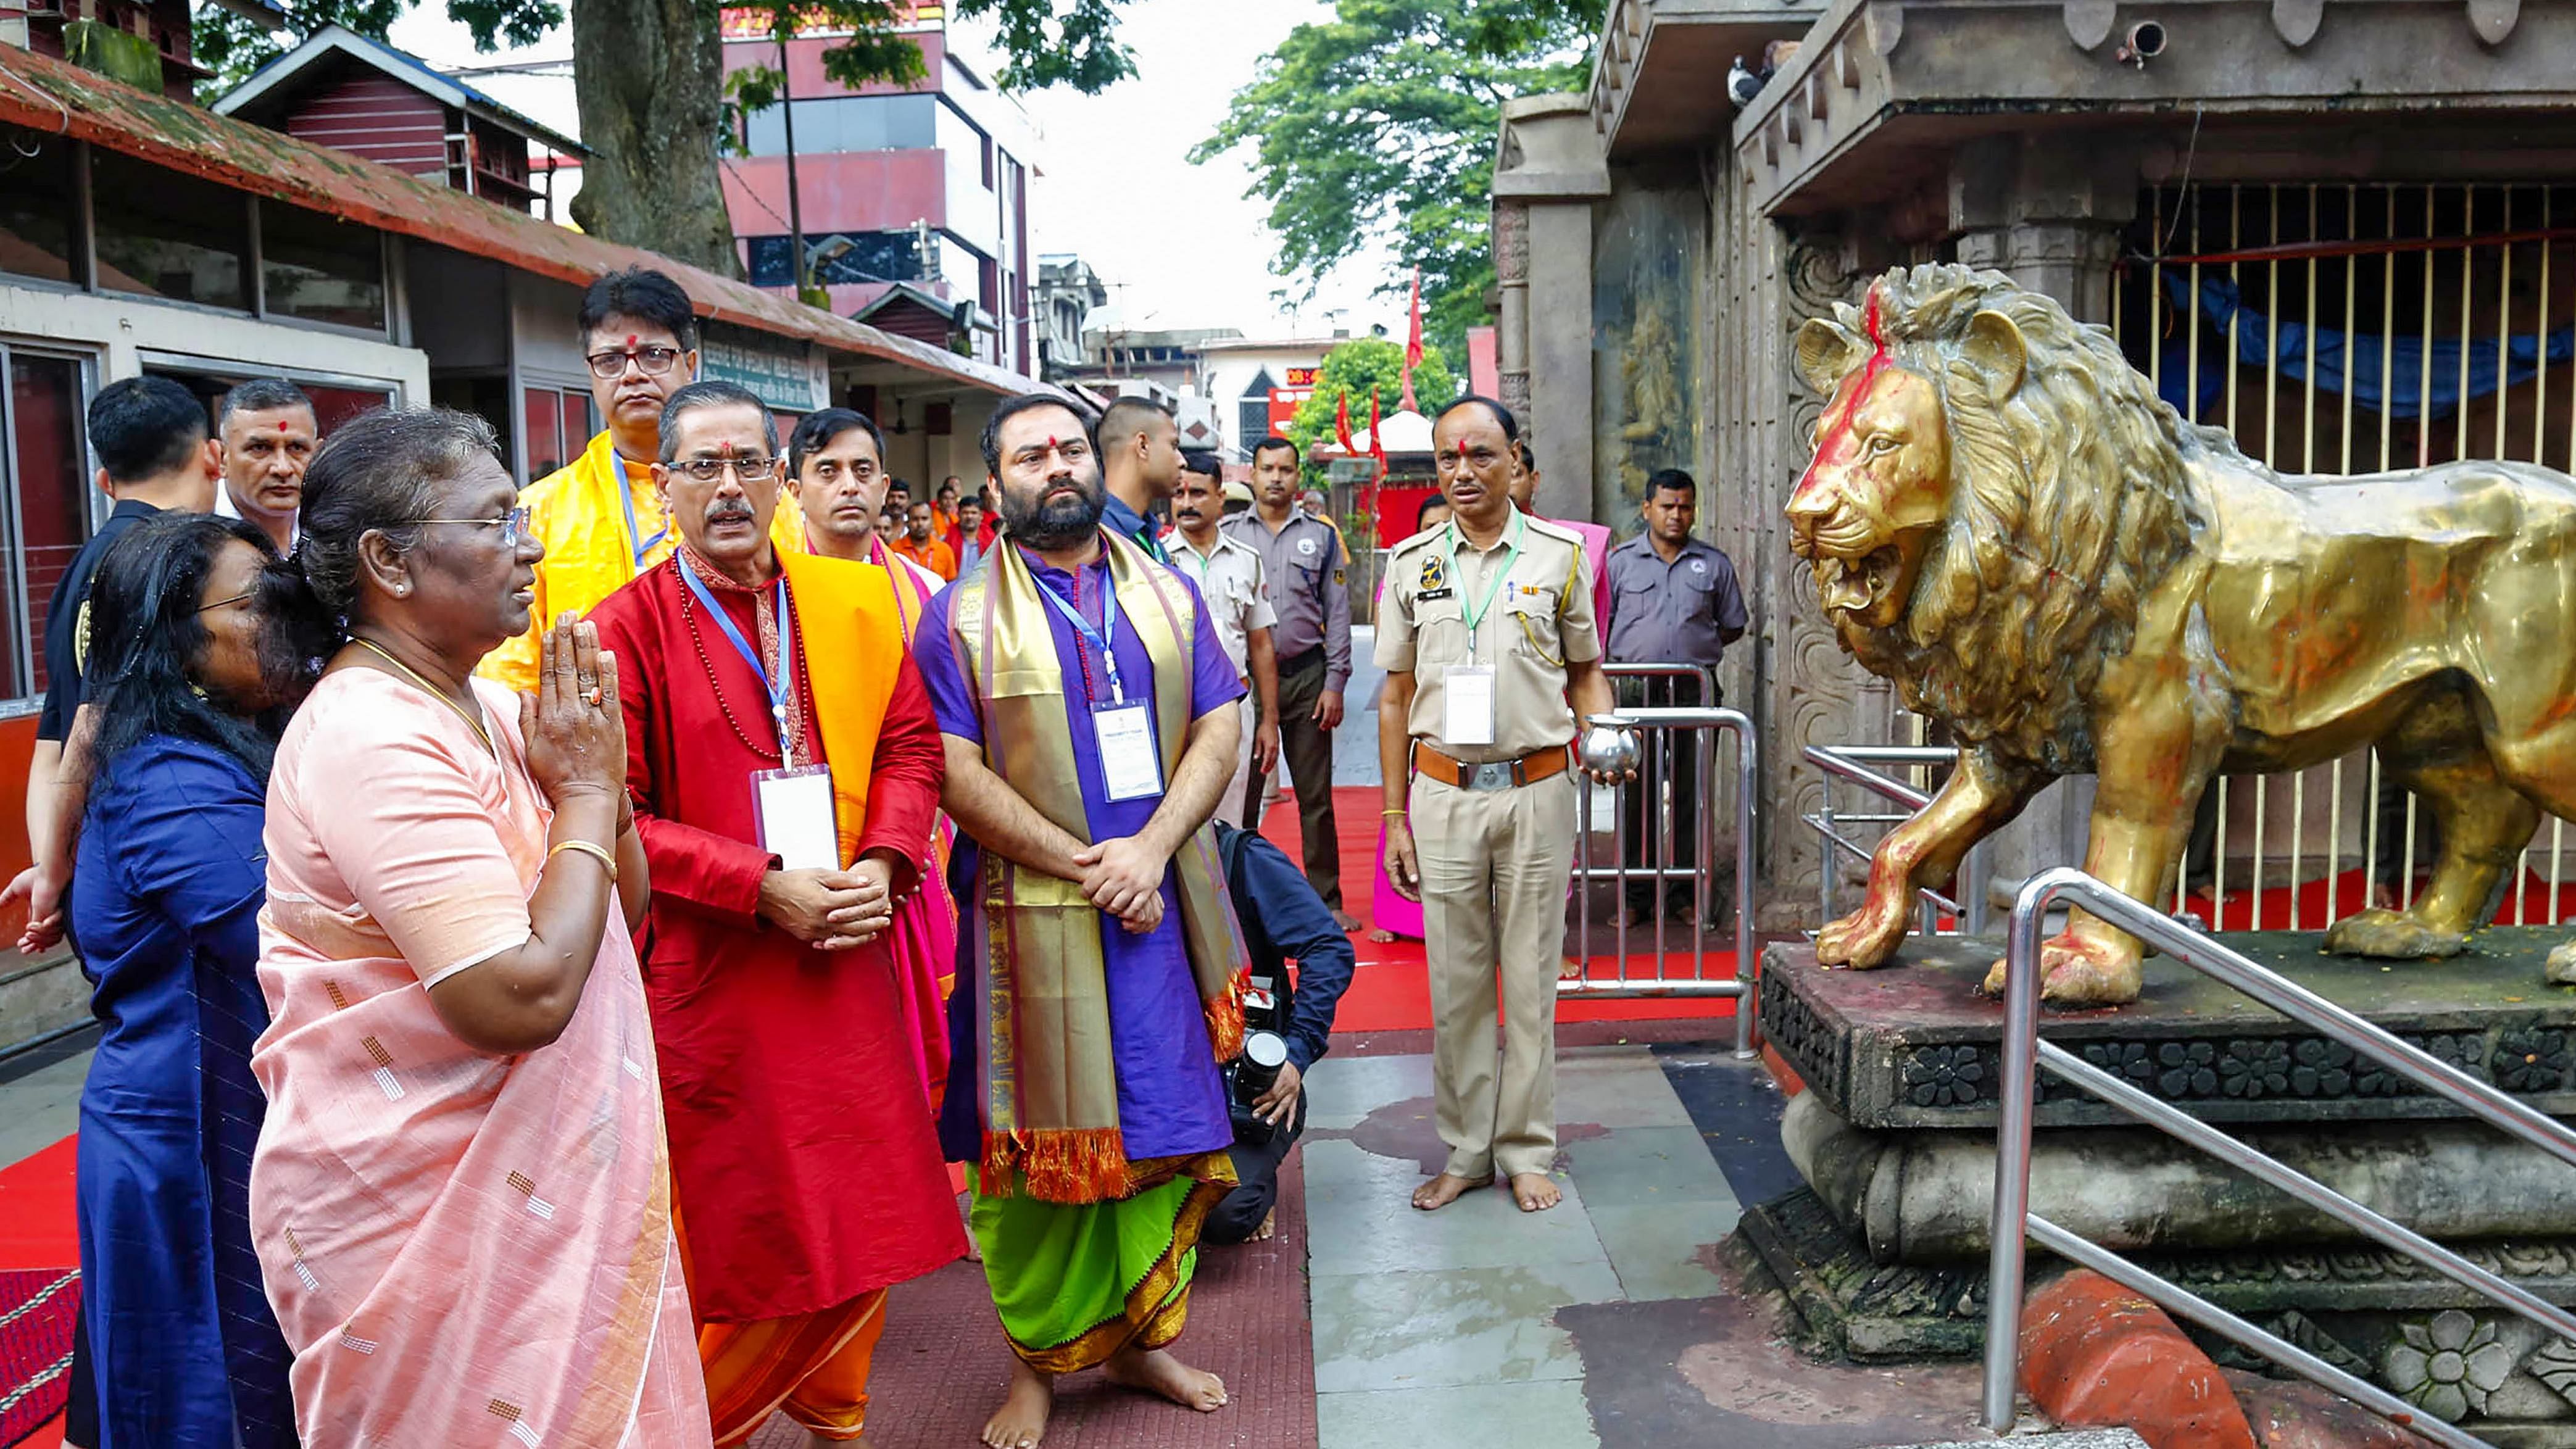 Earlier this year, Murmu had offered prayer at the temple during her visit to the city while campaigning for the presidential election. Credit: PTI Photo